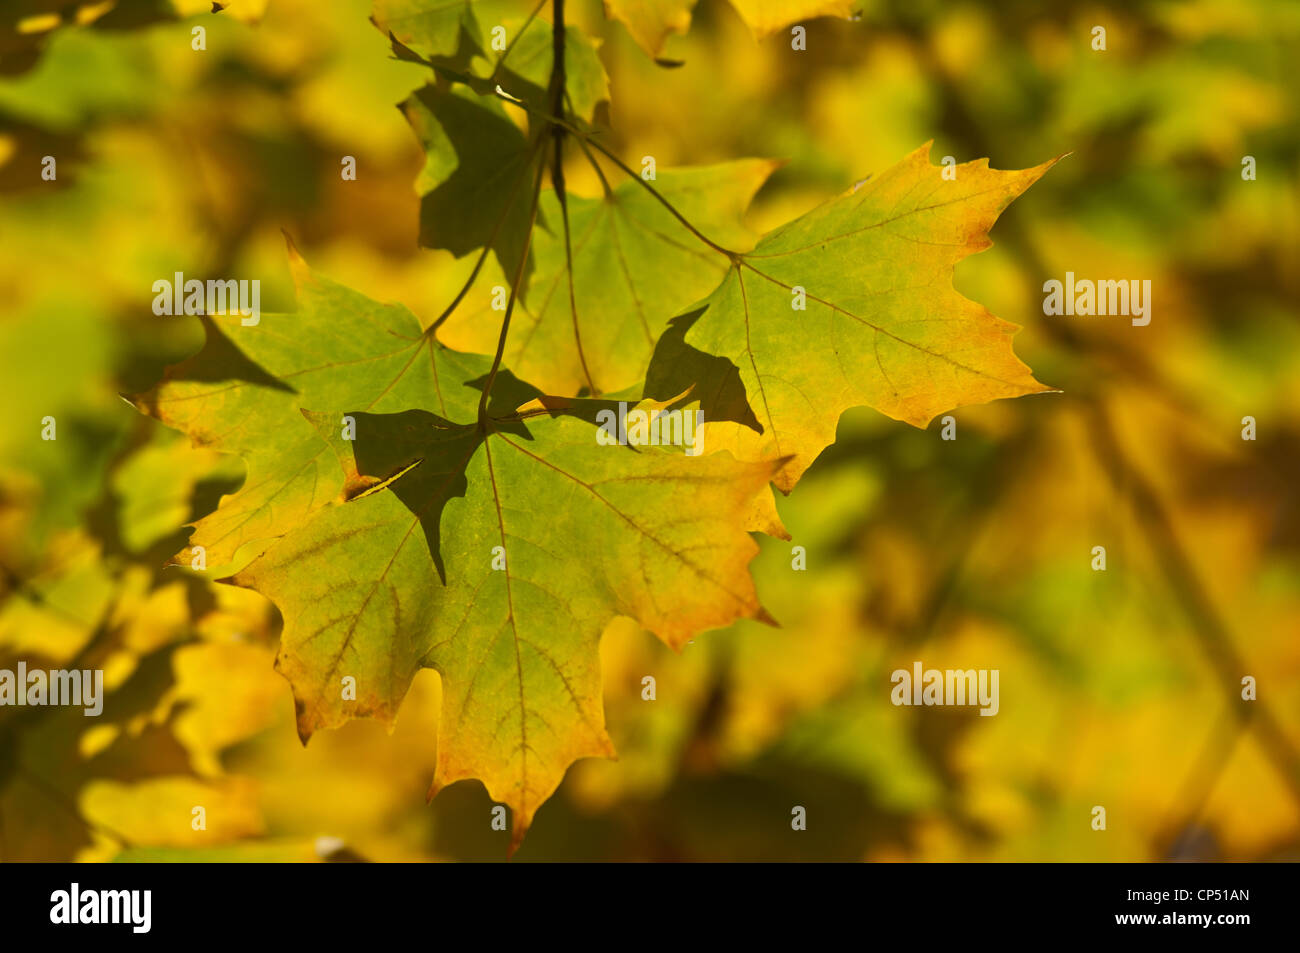 Green, yellow, early fall foliage leaves of Sugar maple, Acer saccharum, Aceraceae Stock Photo